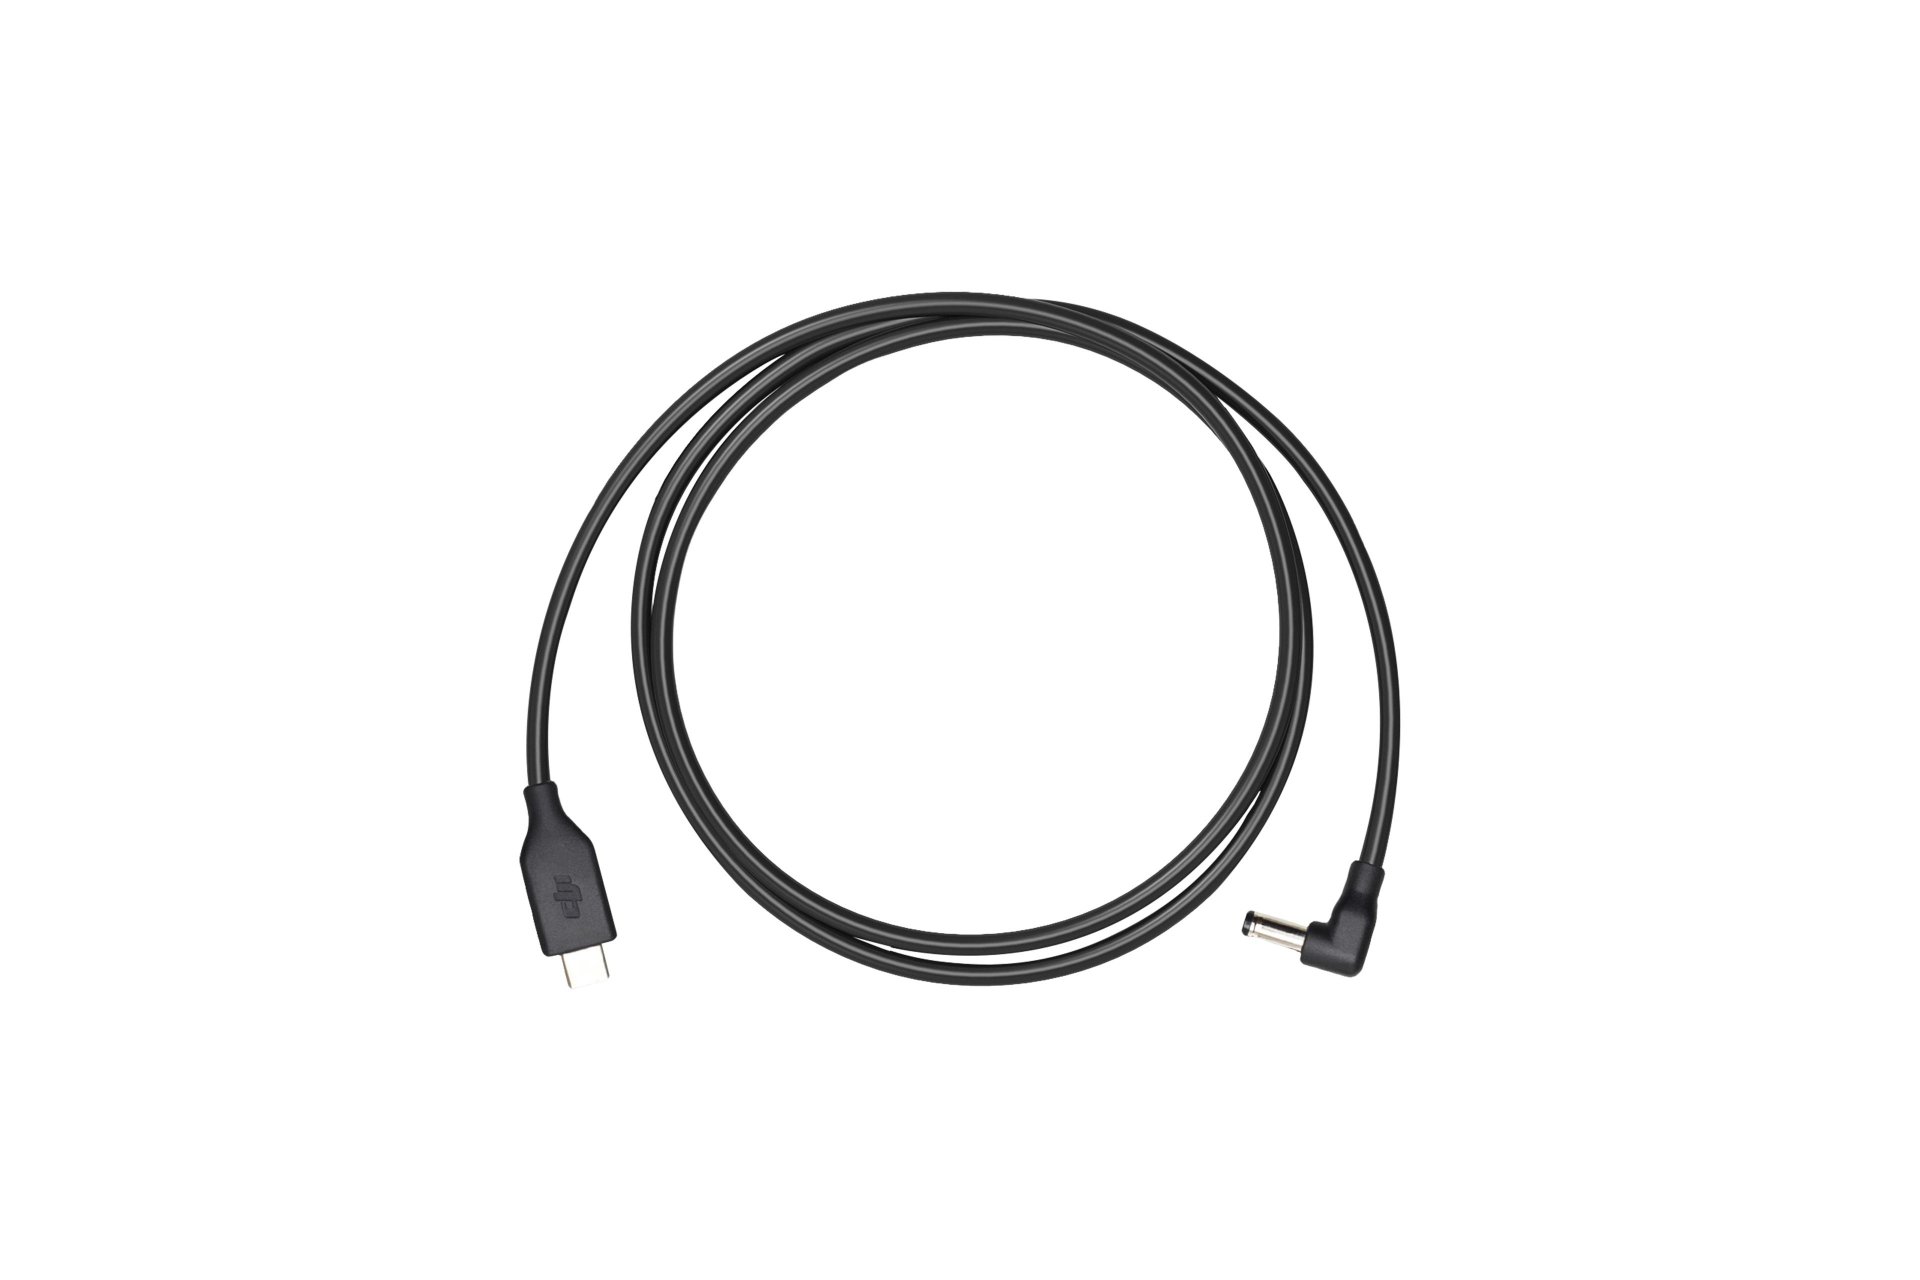 DJI FPV Goggles Power Cable USB-C CP.FP.00000038.01